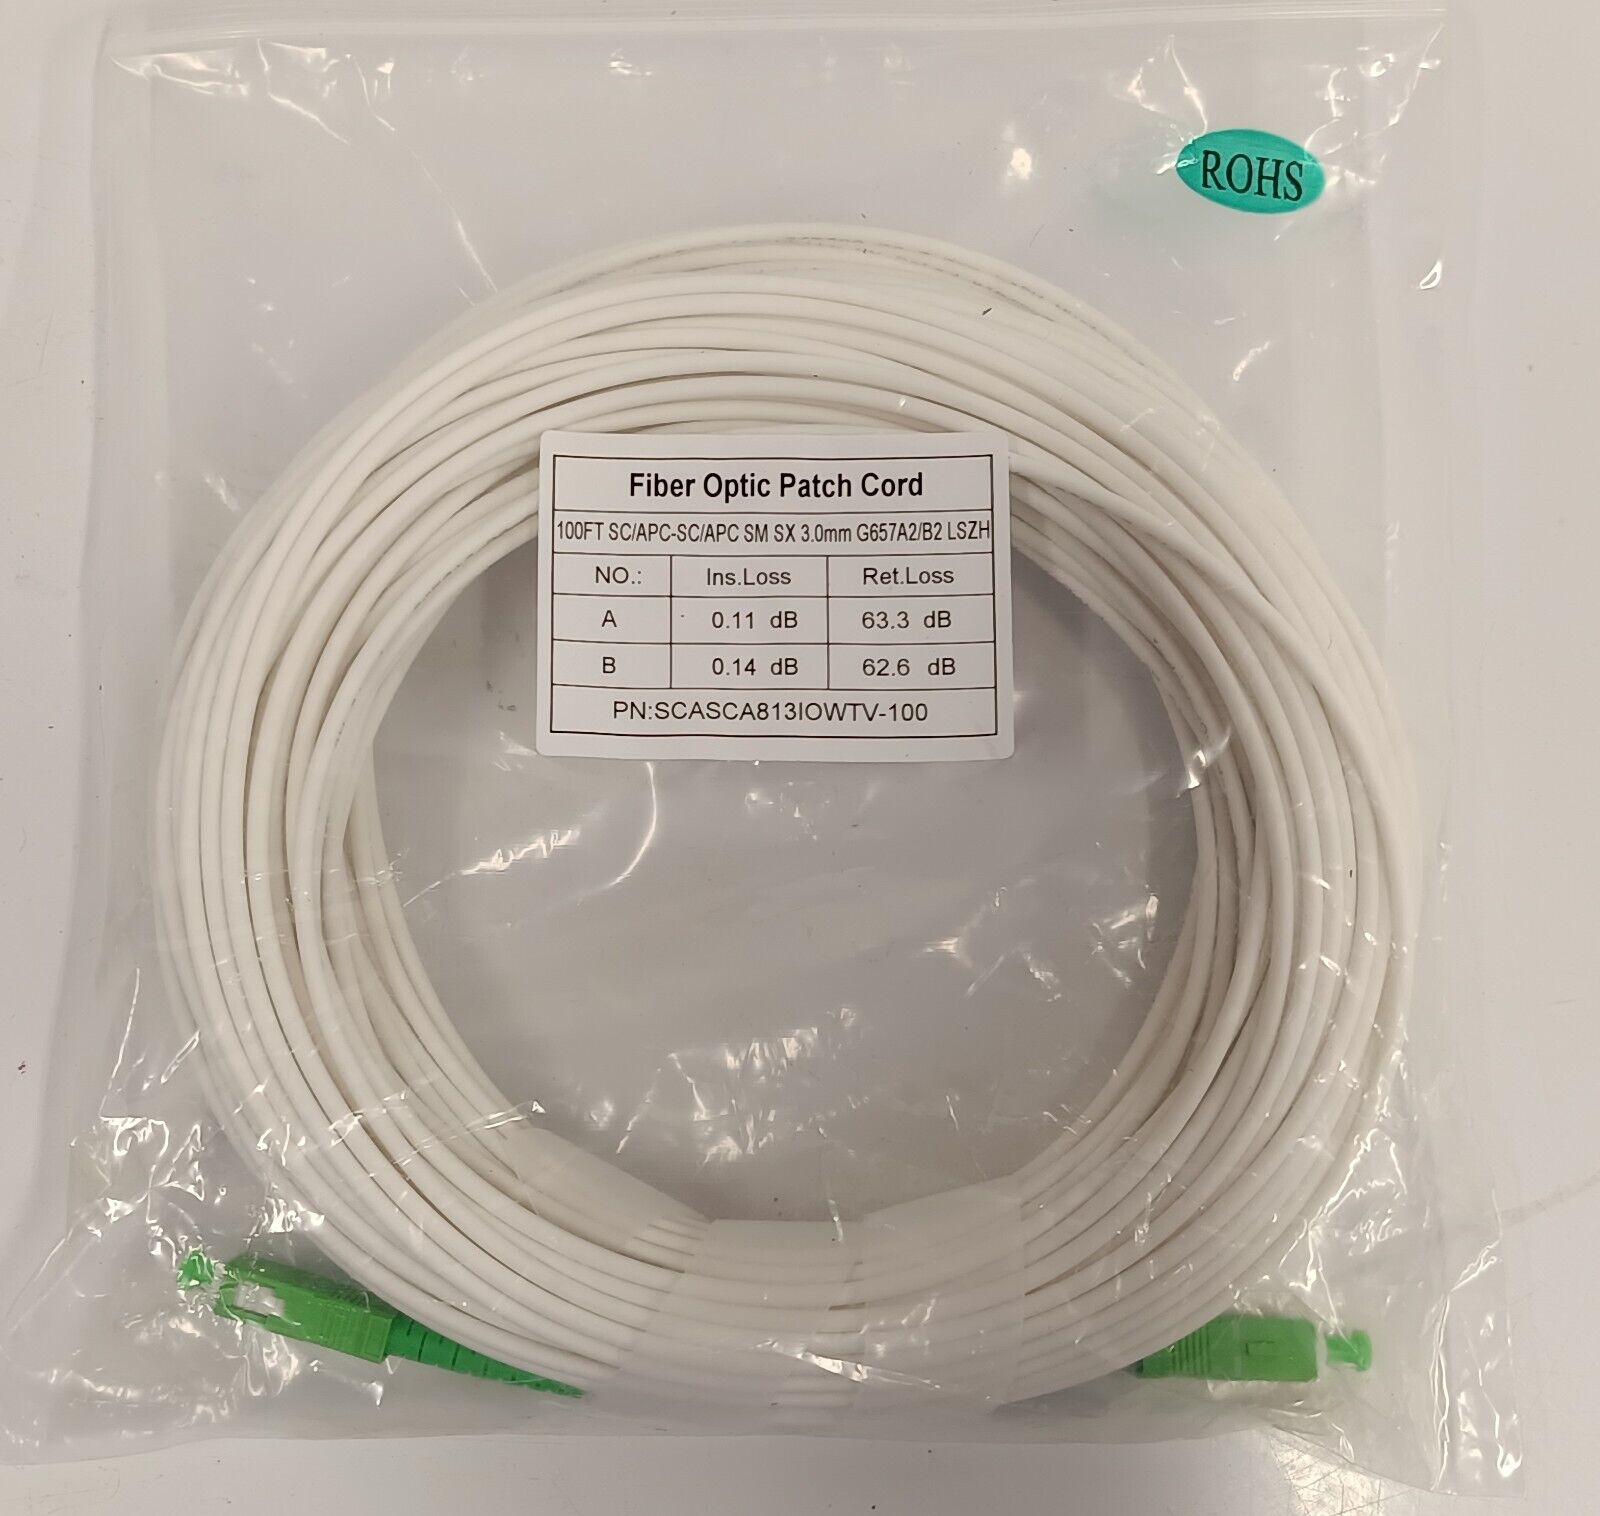 ROHS SCASCA8131OWTV Jumper Fiber Cable Assembly 100 ft Ruggedized Drop Cable